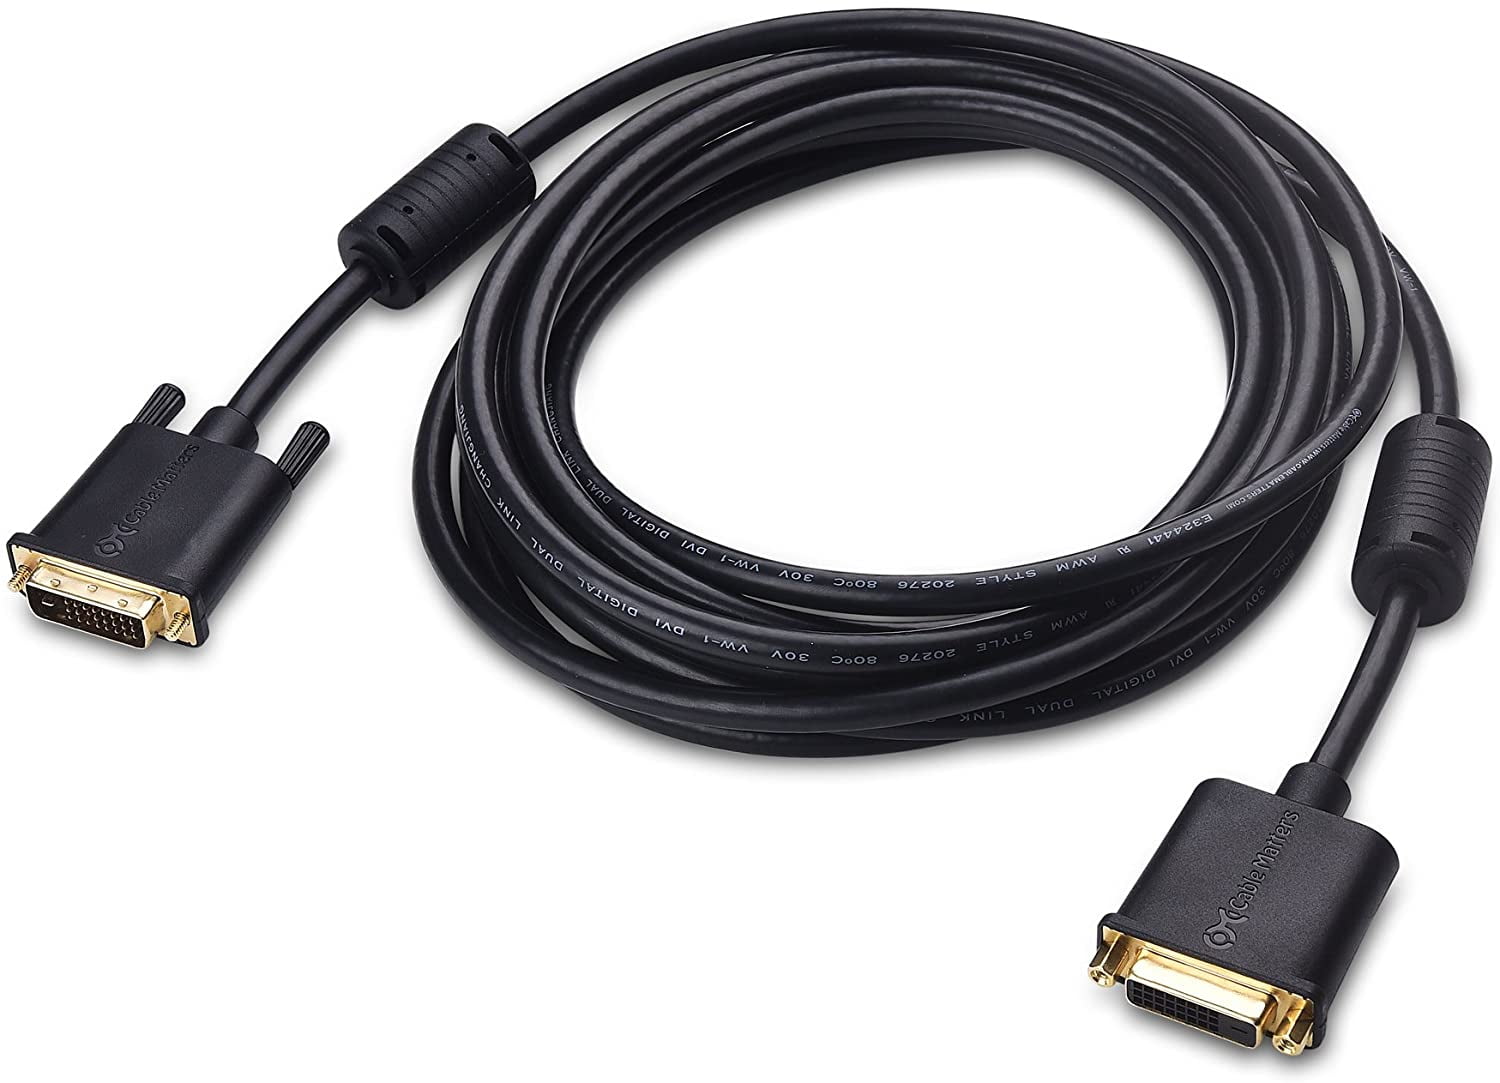 Cable Matters DVI to DVI Extension Cable DVI-D Dual Link Extension Cable 15 Feet 